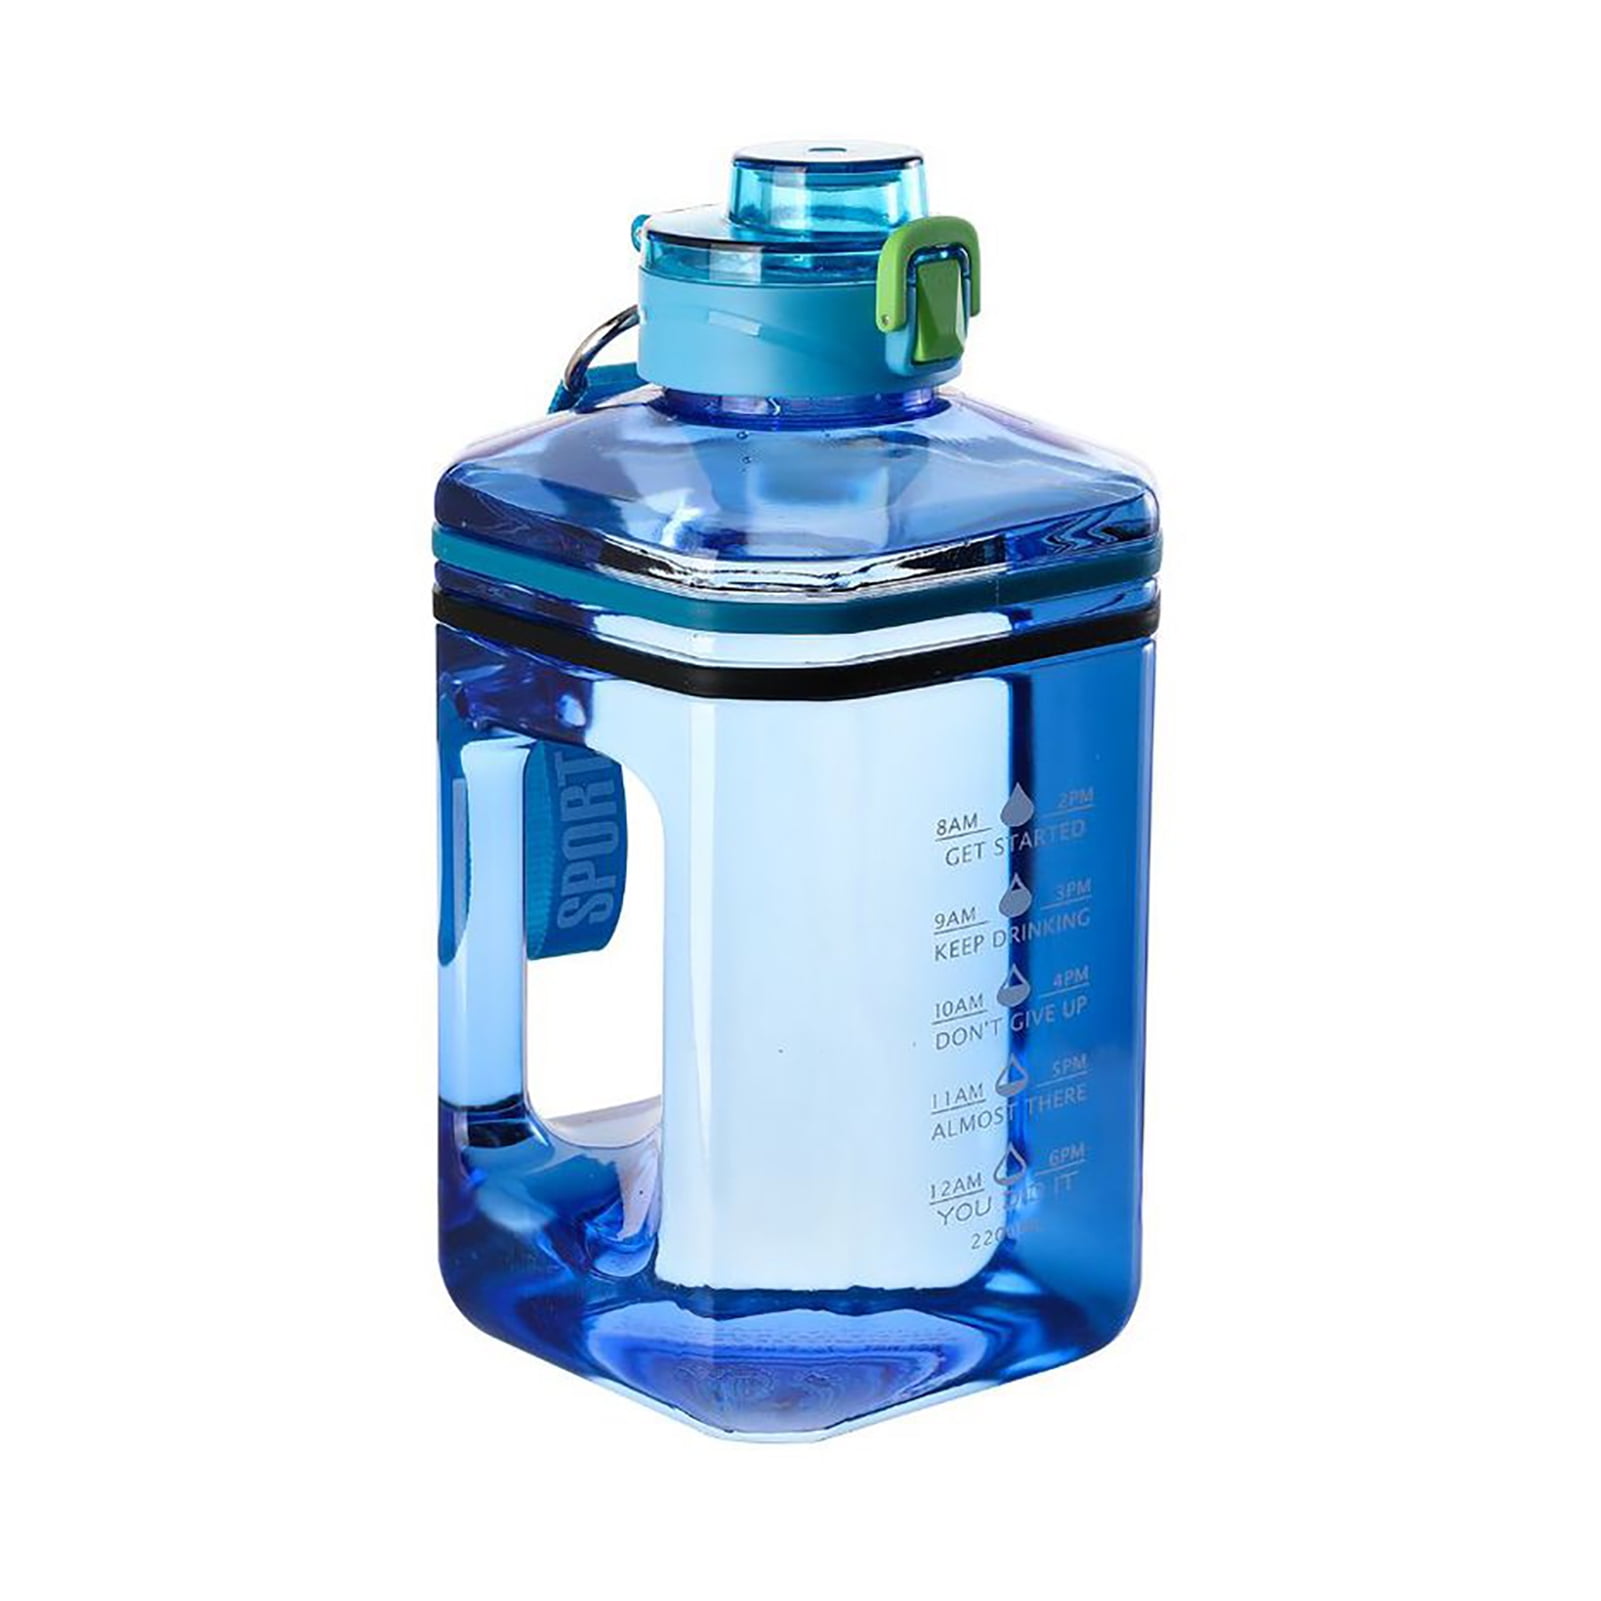 OICEPACK 128 oz Water Bottle 2 in 1 Lid - 1 Gallon Water Bottle Dishwasher  Safe, Gallon Water Jug Mo…See more OICEPACK 128 oz Water Bottle 2 in 1 Lid